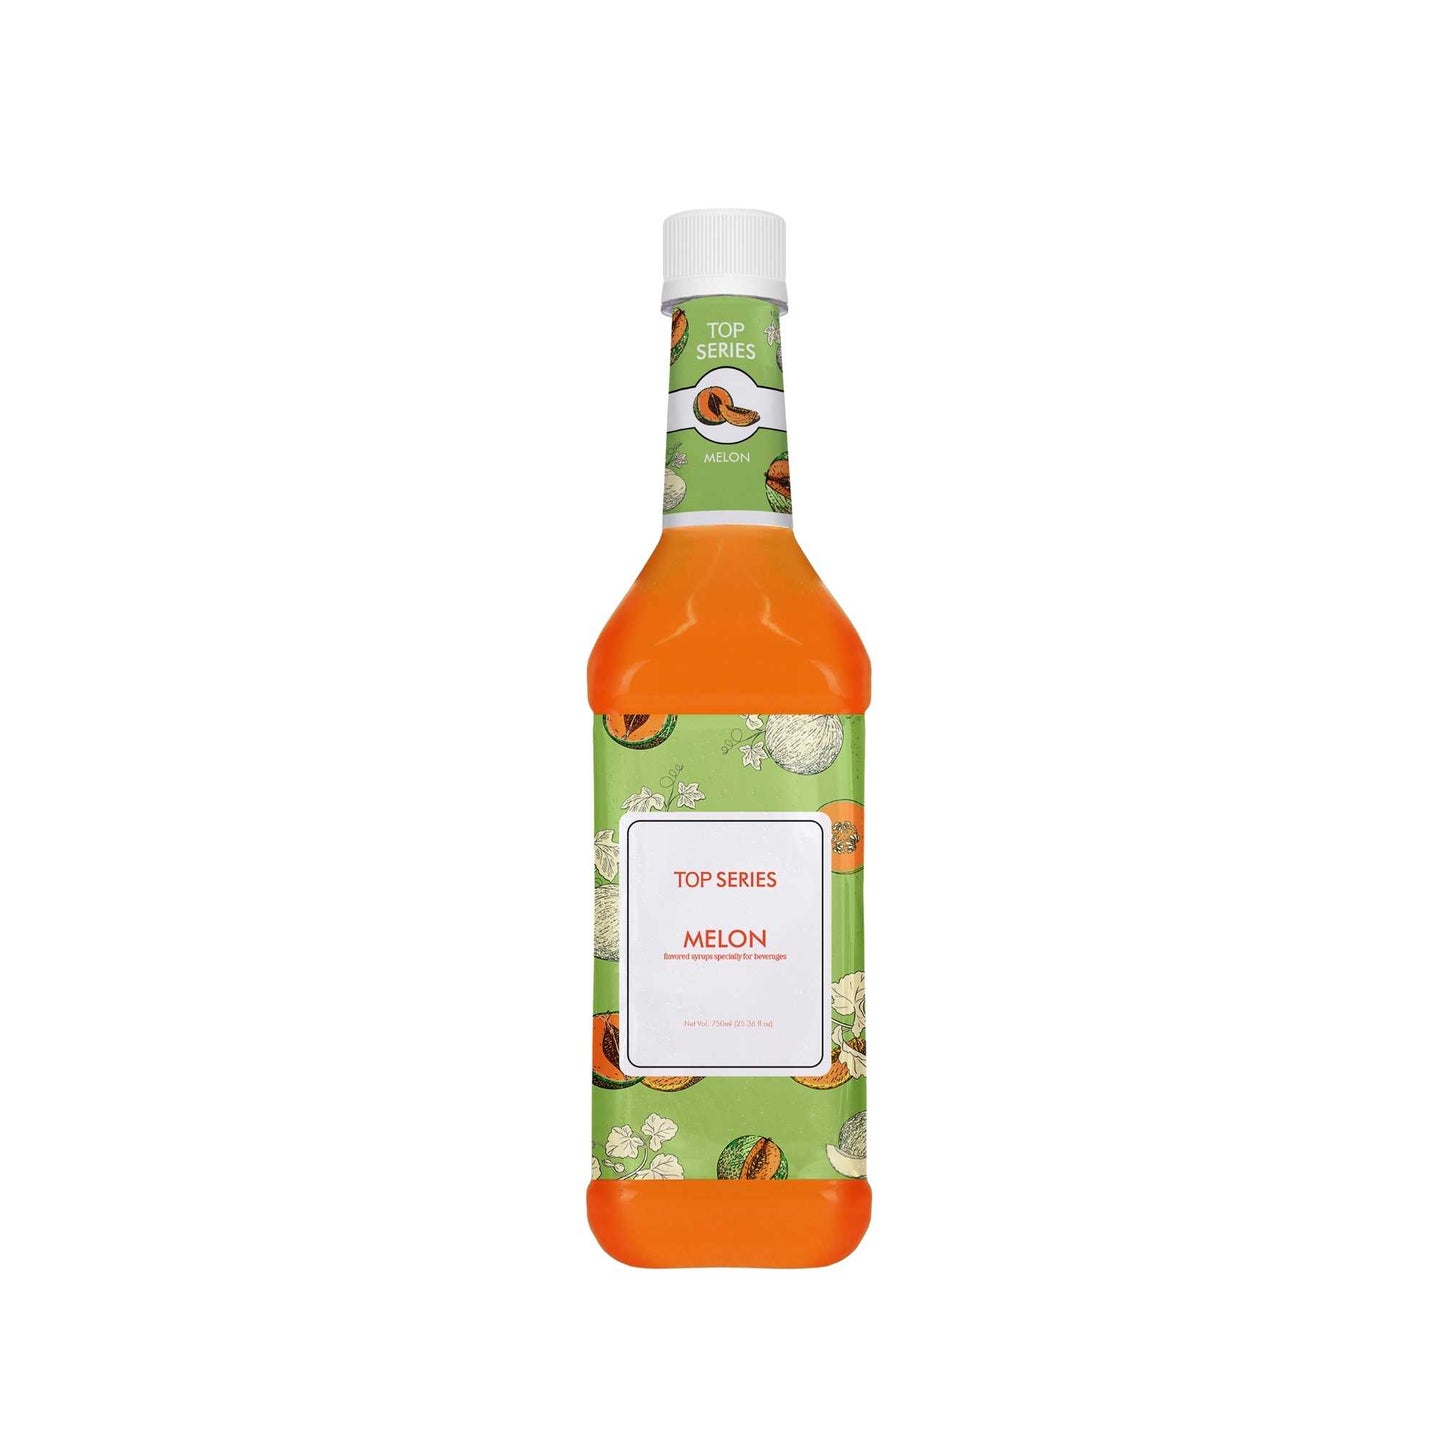 TOP Creamery Top Series Melon Syrup 750ml